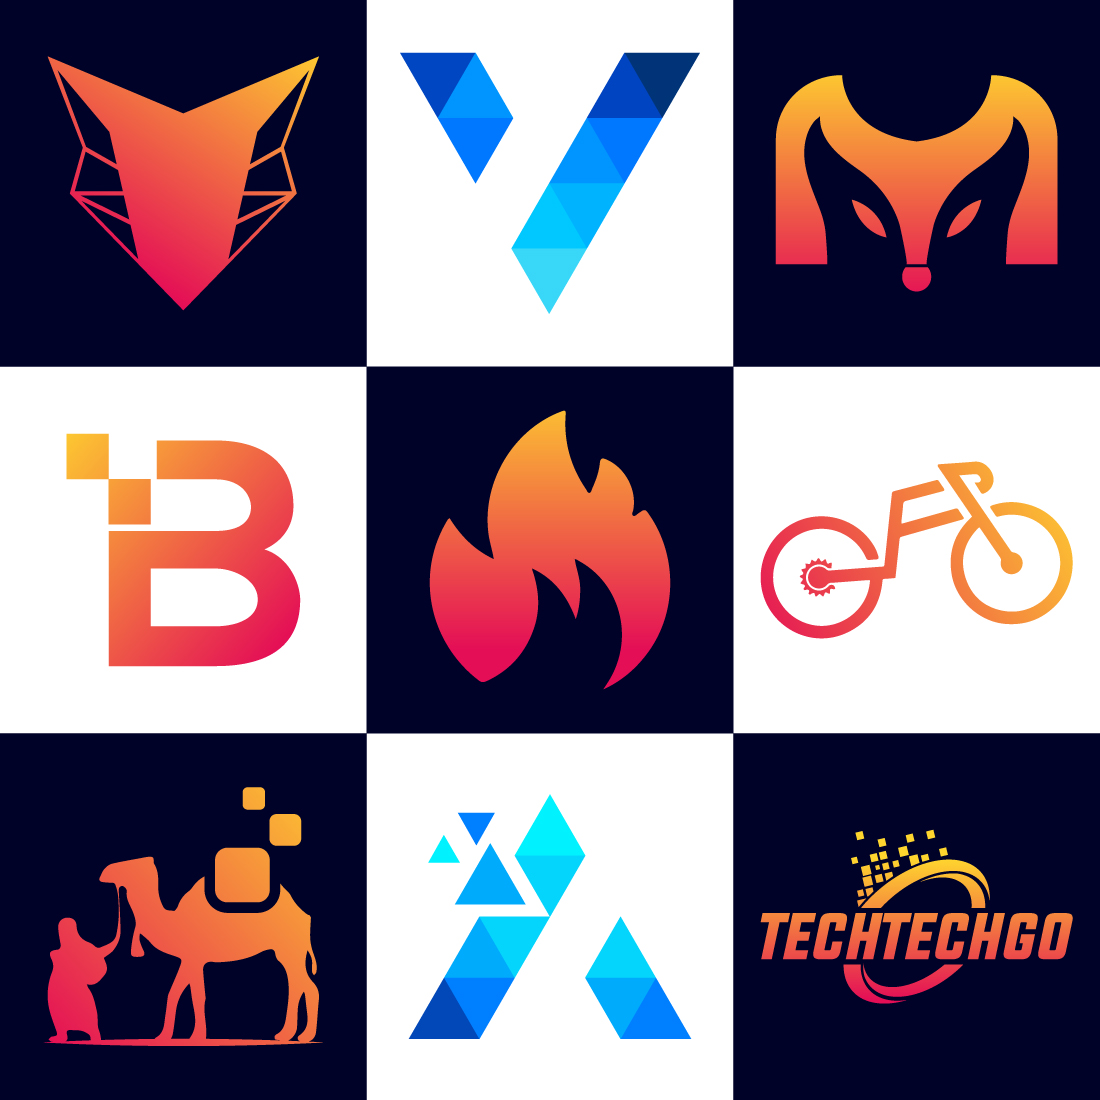 A set of images with amazing logos.